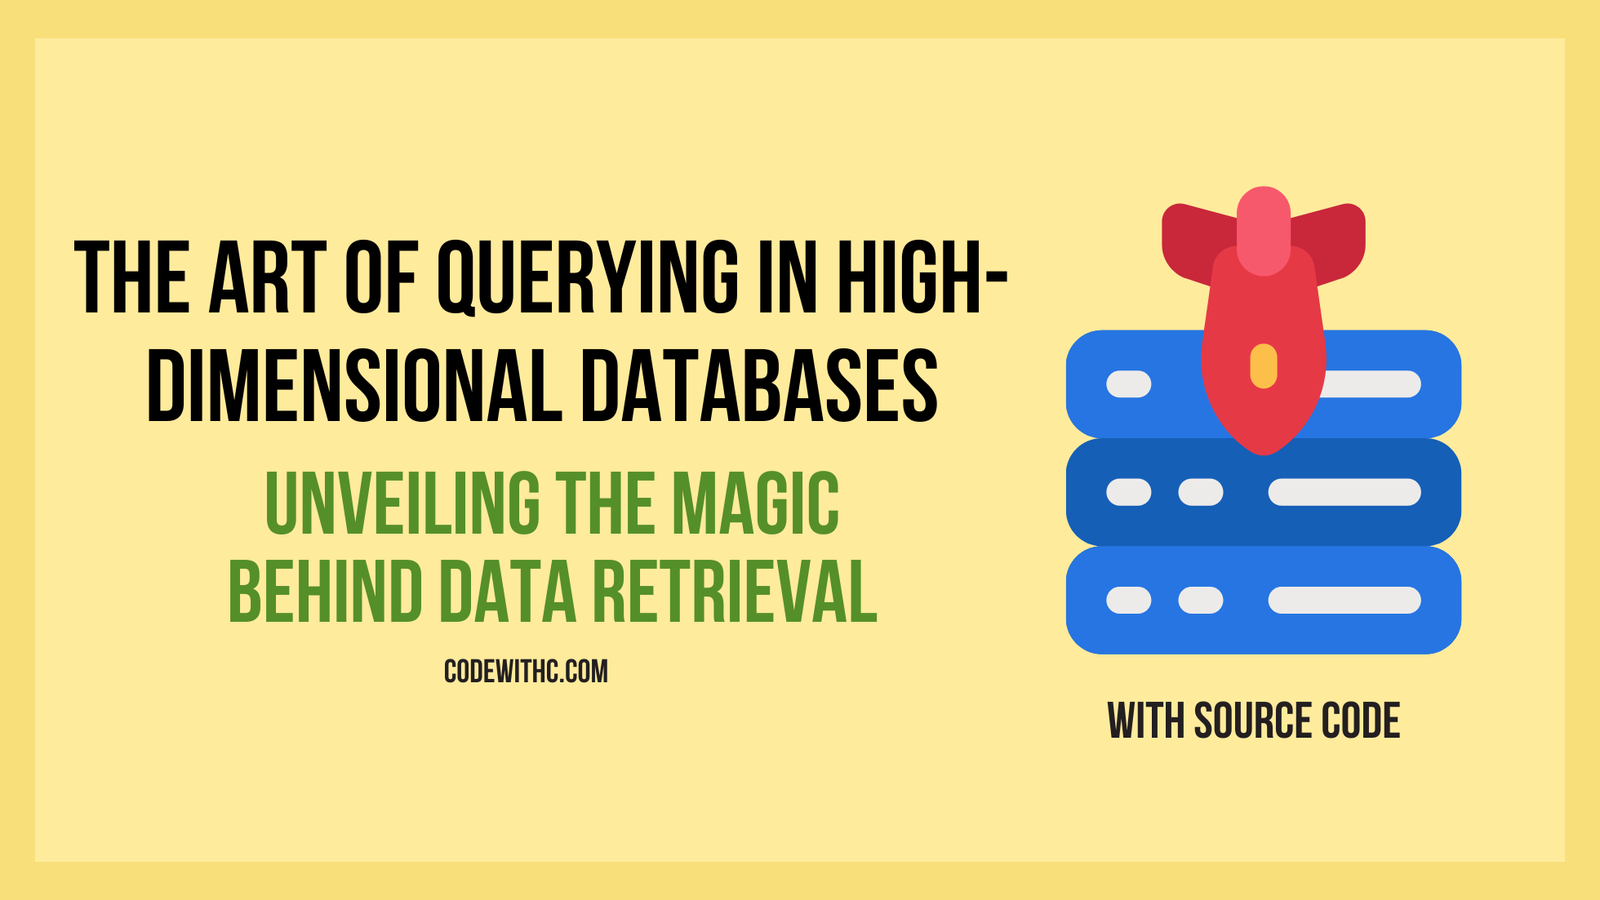 The Art of Querying in High-Dimensional Databases Unveiling the Magic Behind Data Retrieval